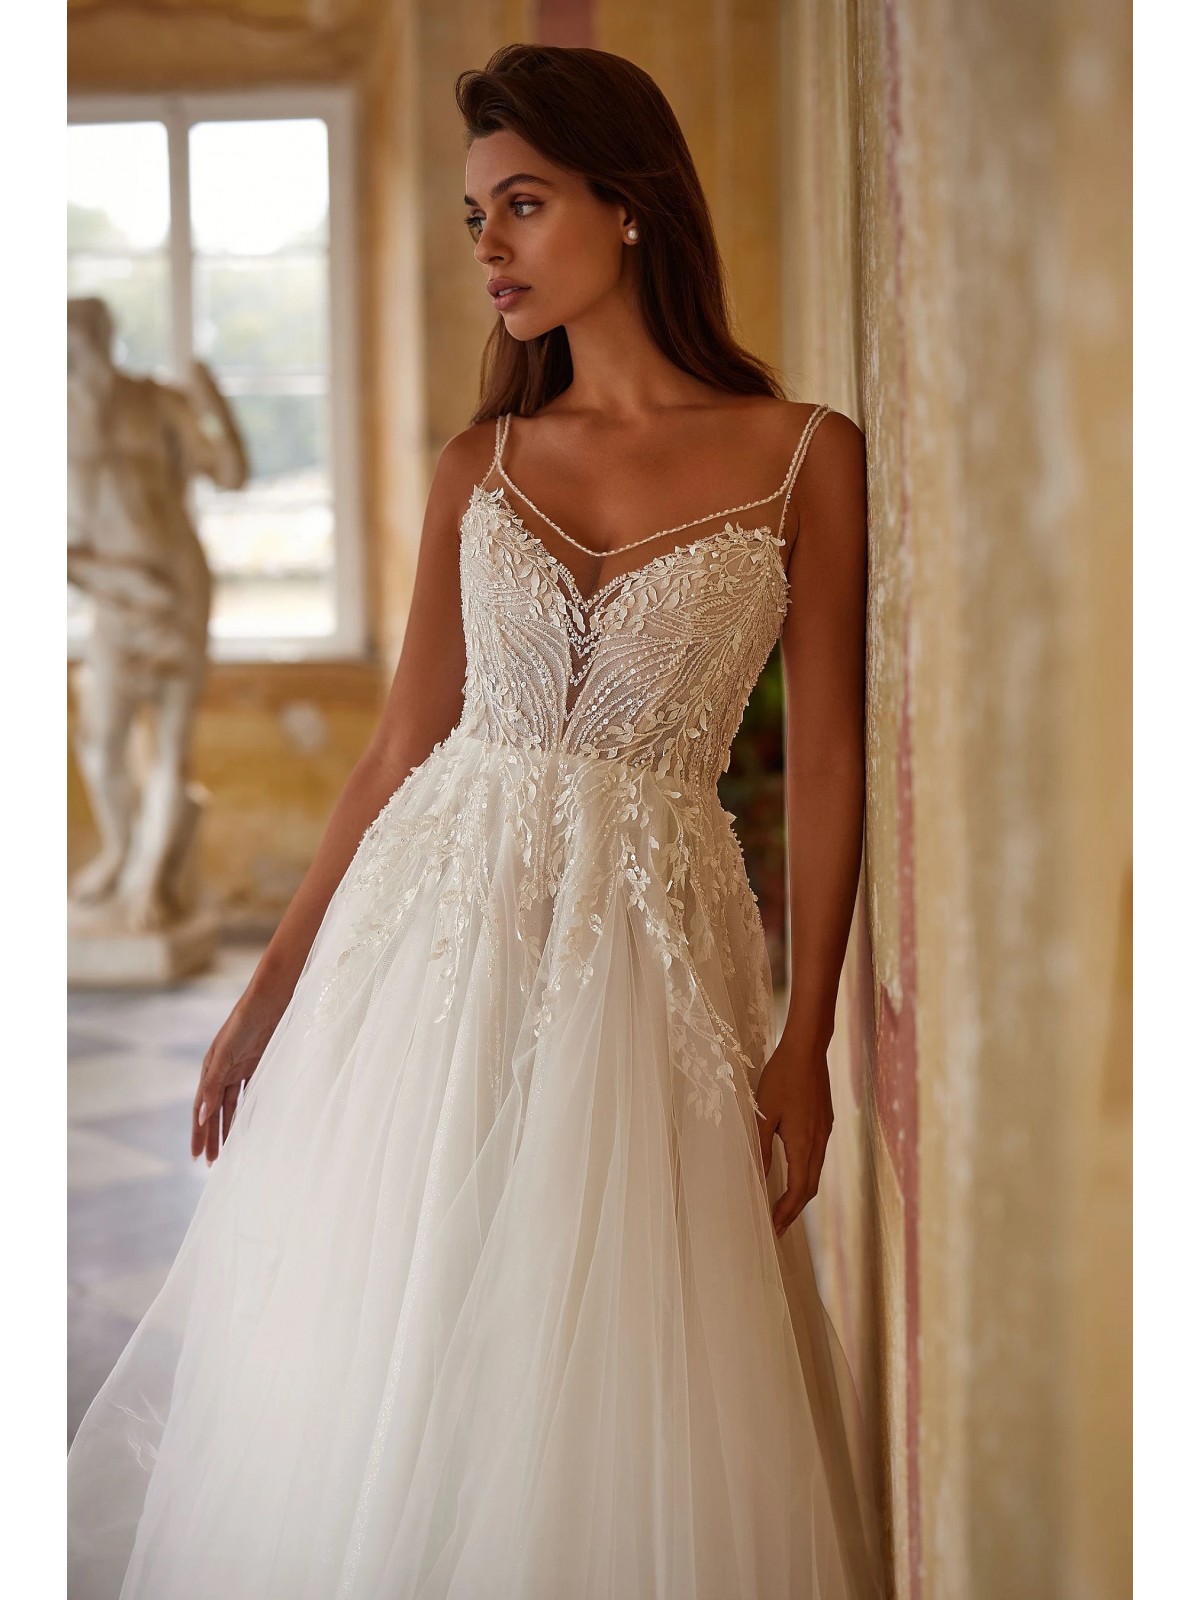 Luxury Wedding Dress - A-line with Thin Straps and a Deep V-neck - Wensen - LIDA-01343.00.17